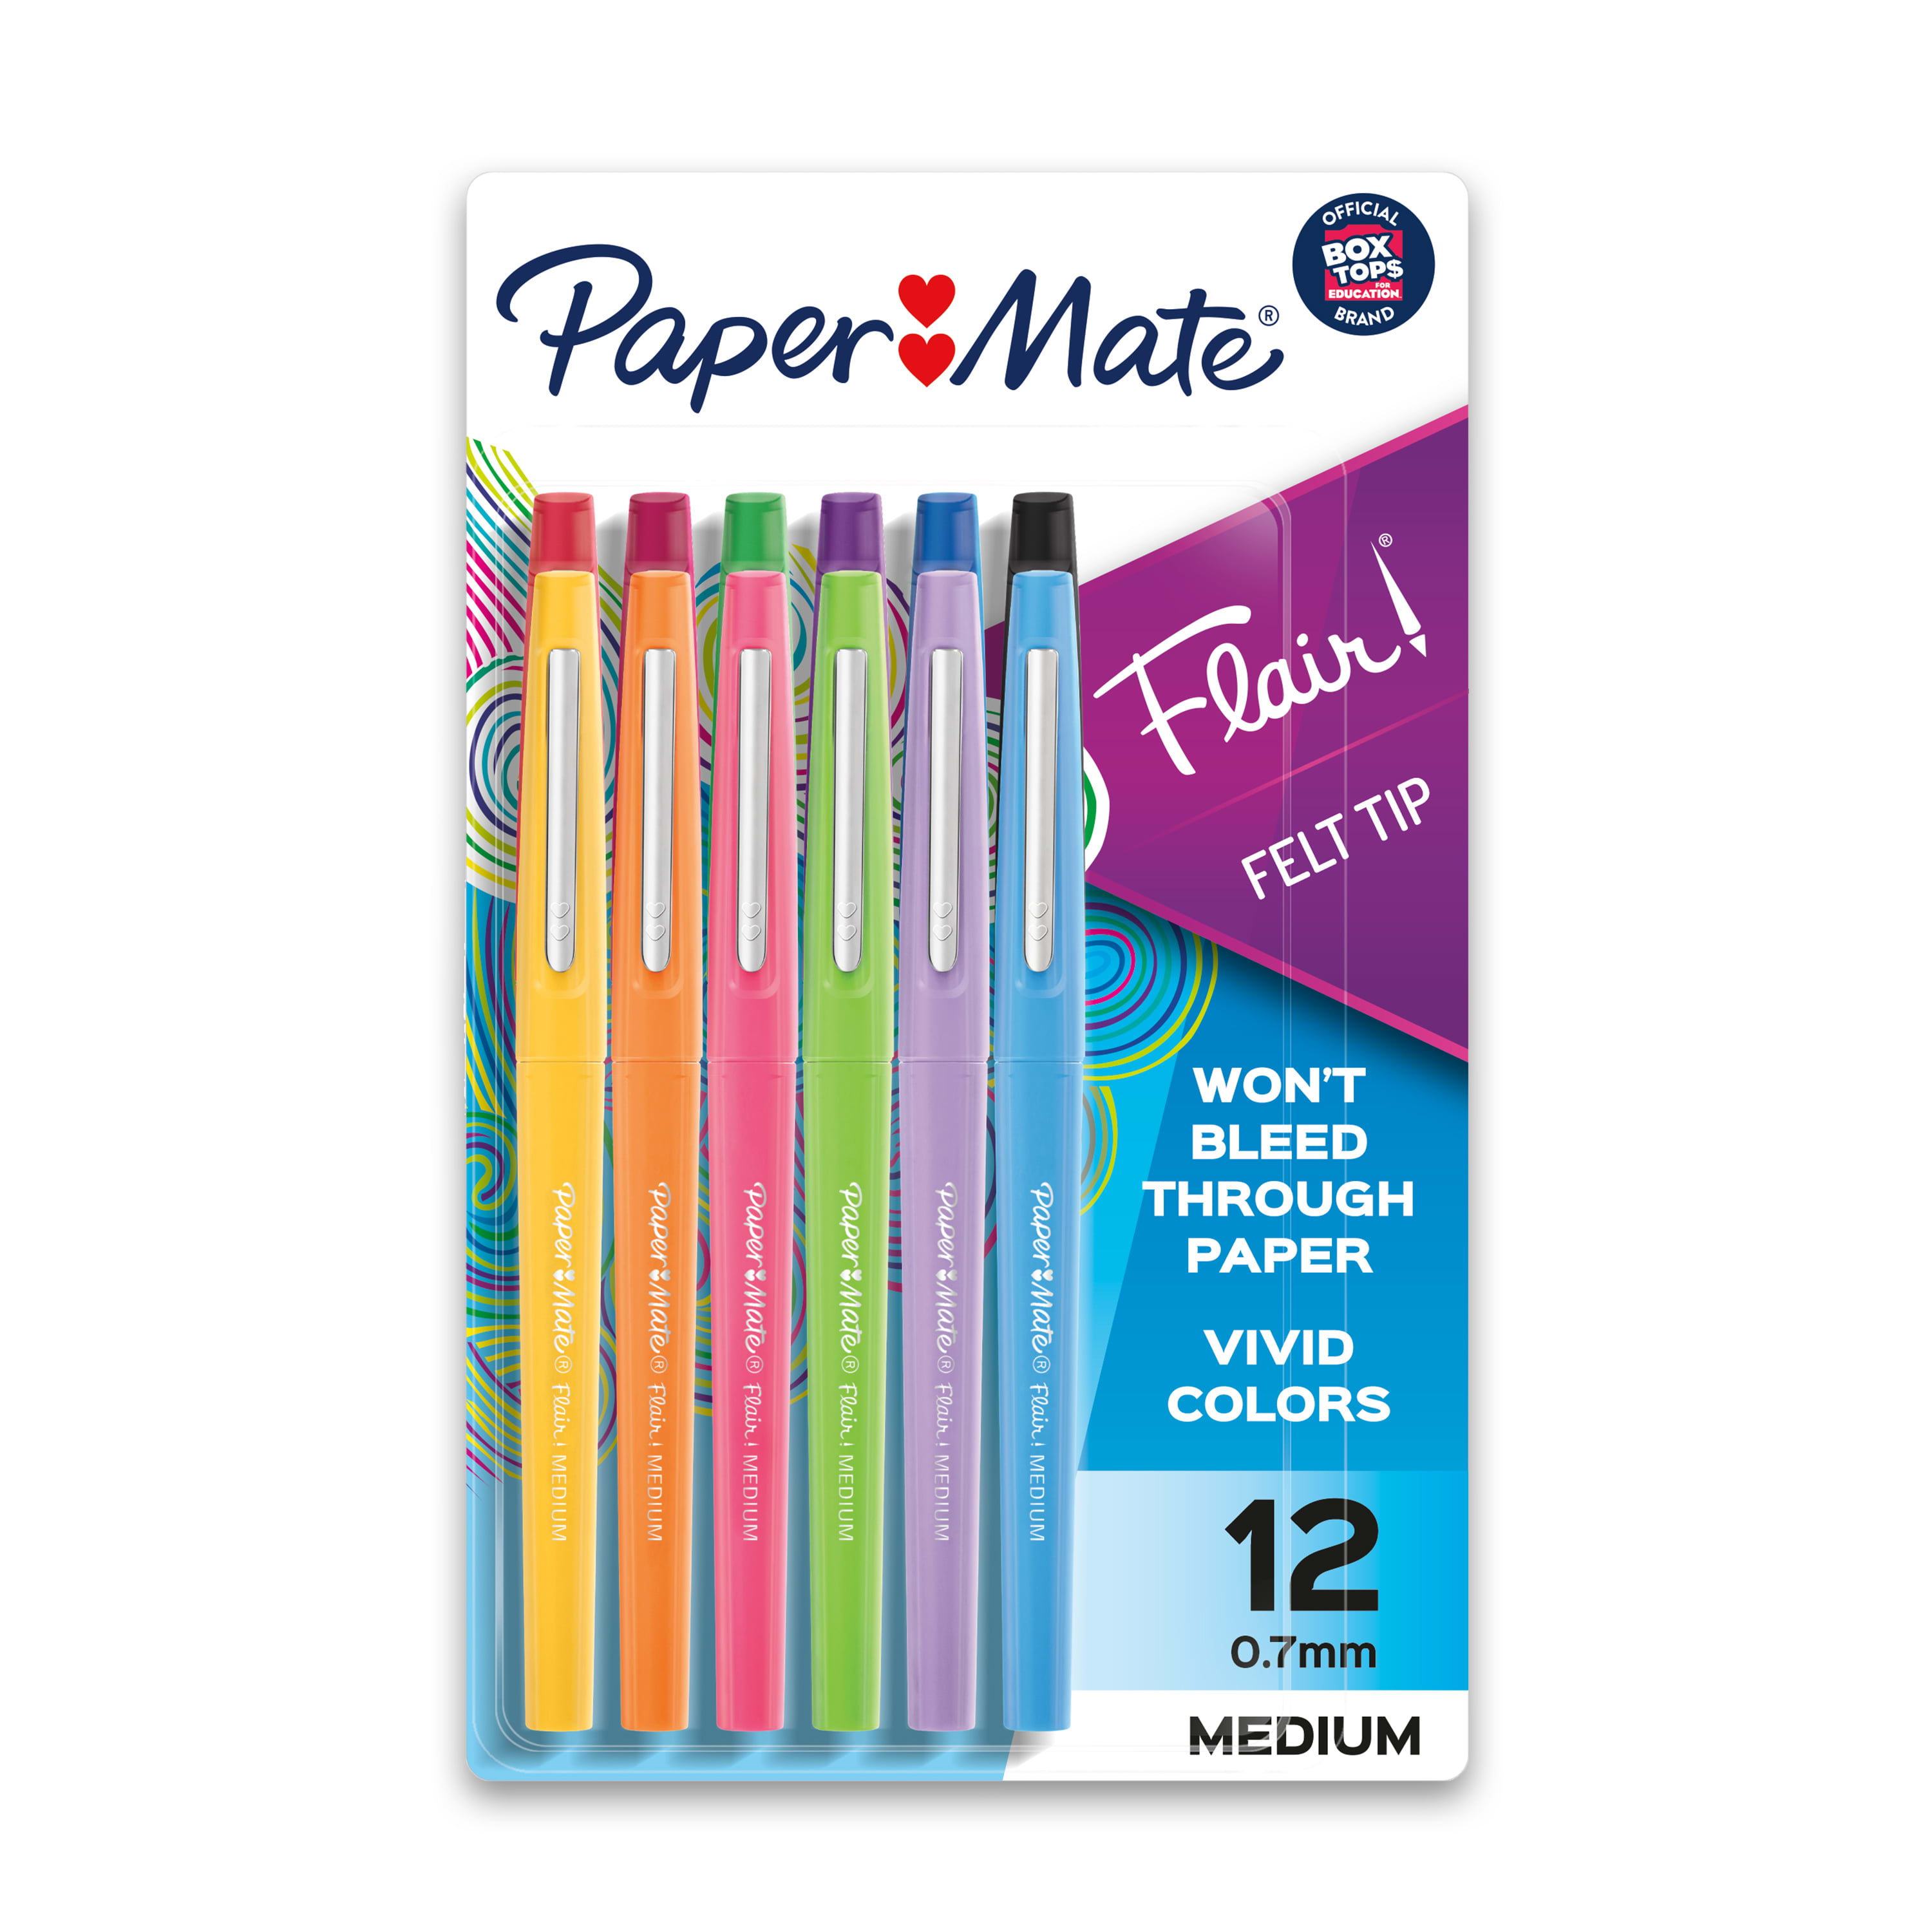  Paper Mate Flair Felt Tip Pens, Medium Point, 12-Count, Black  : Office Products